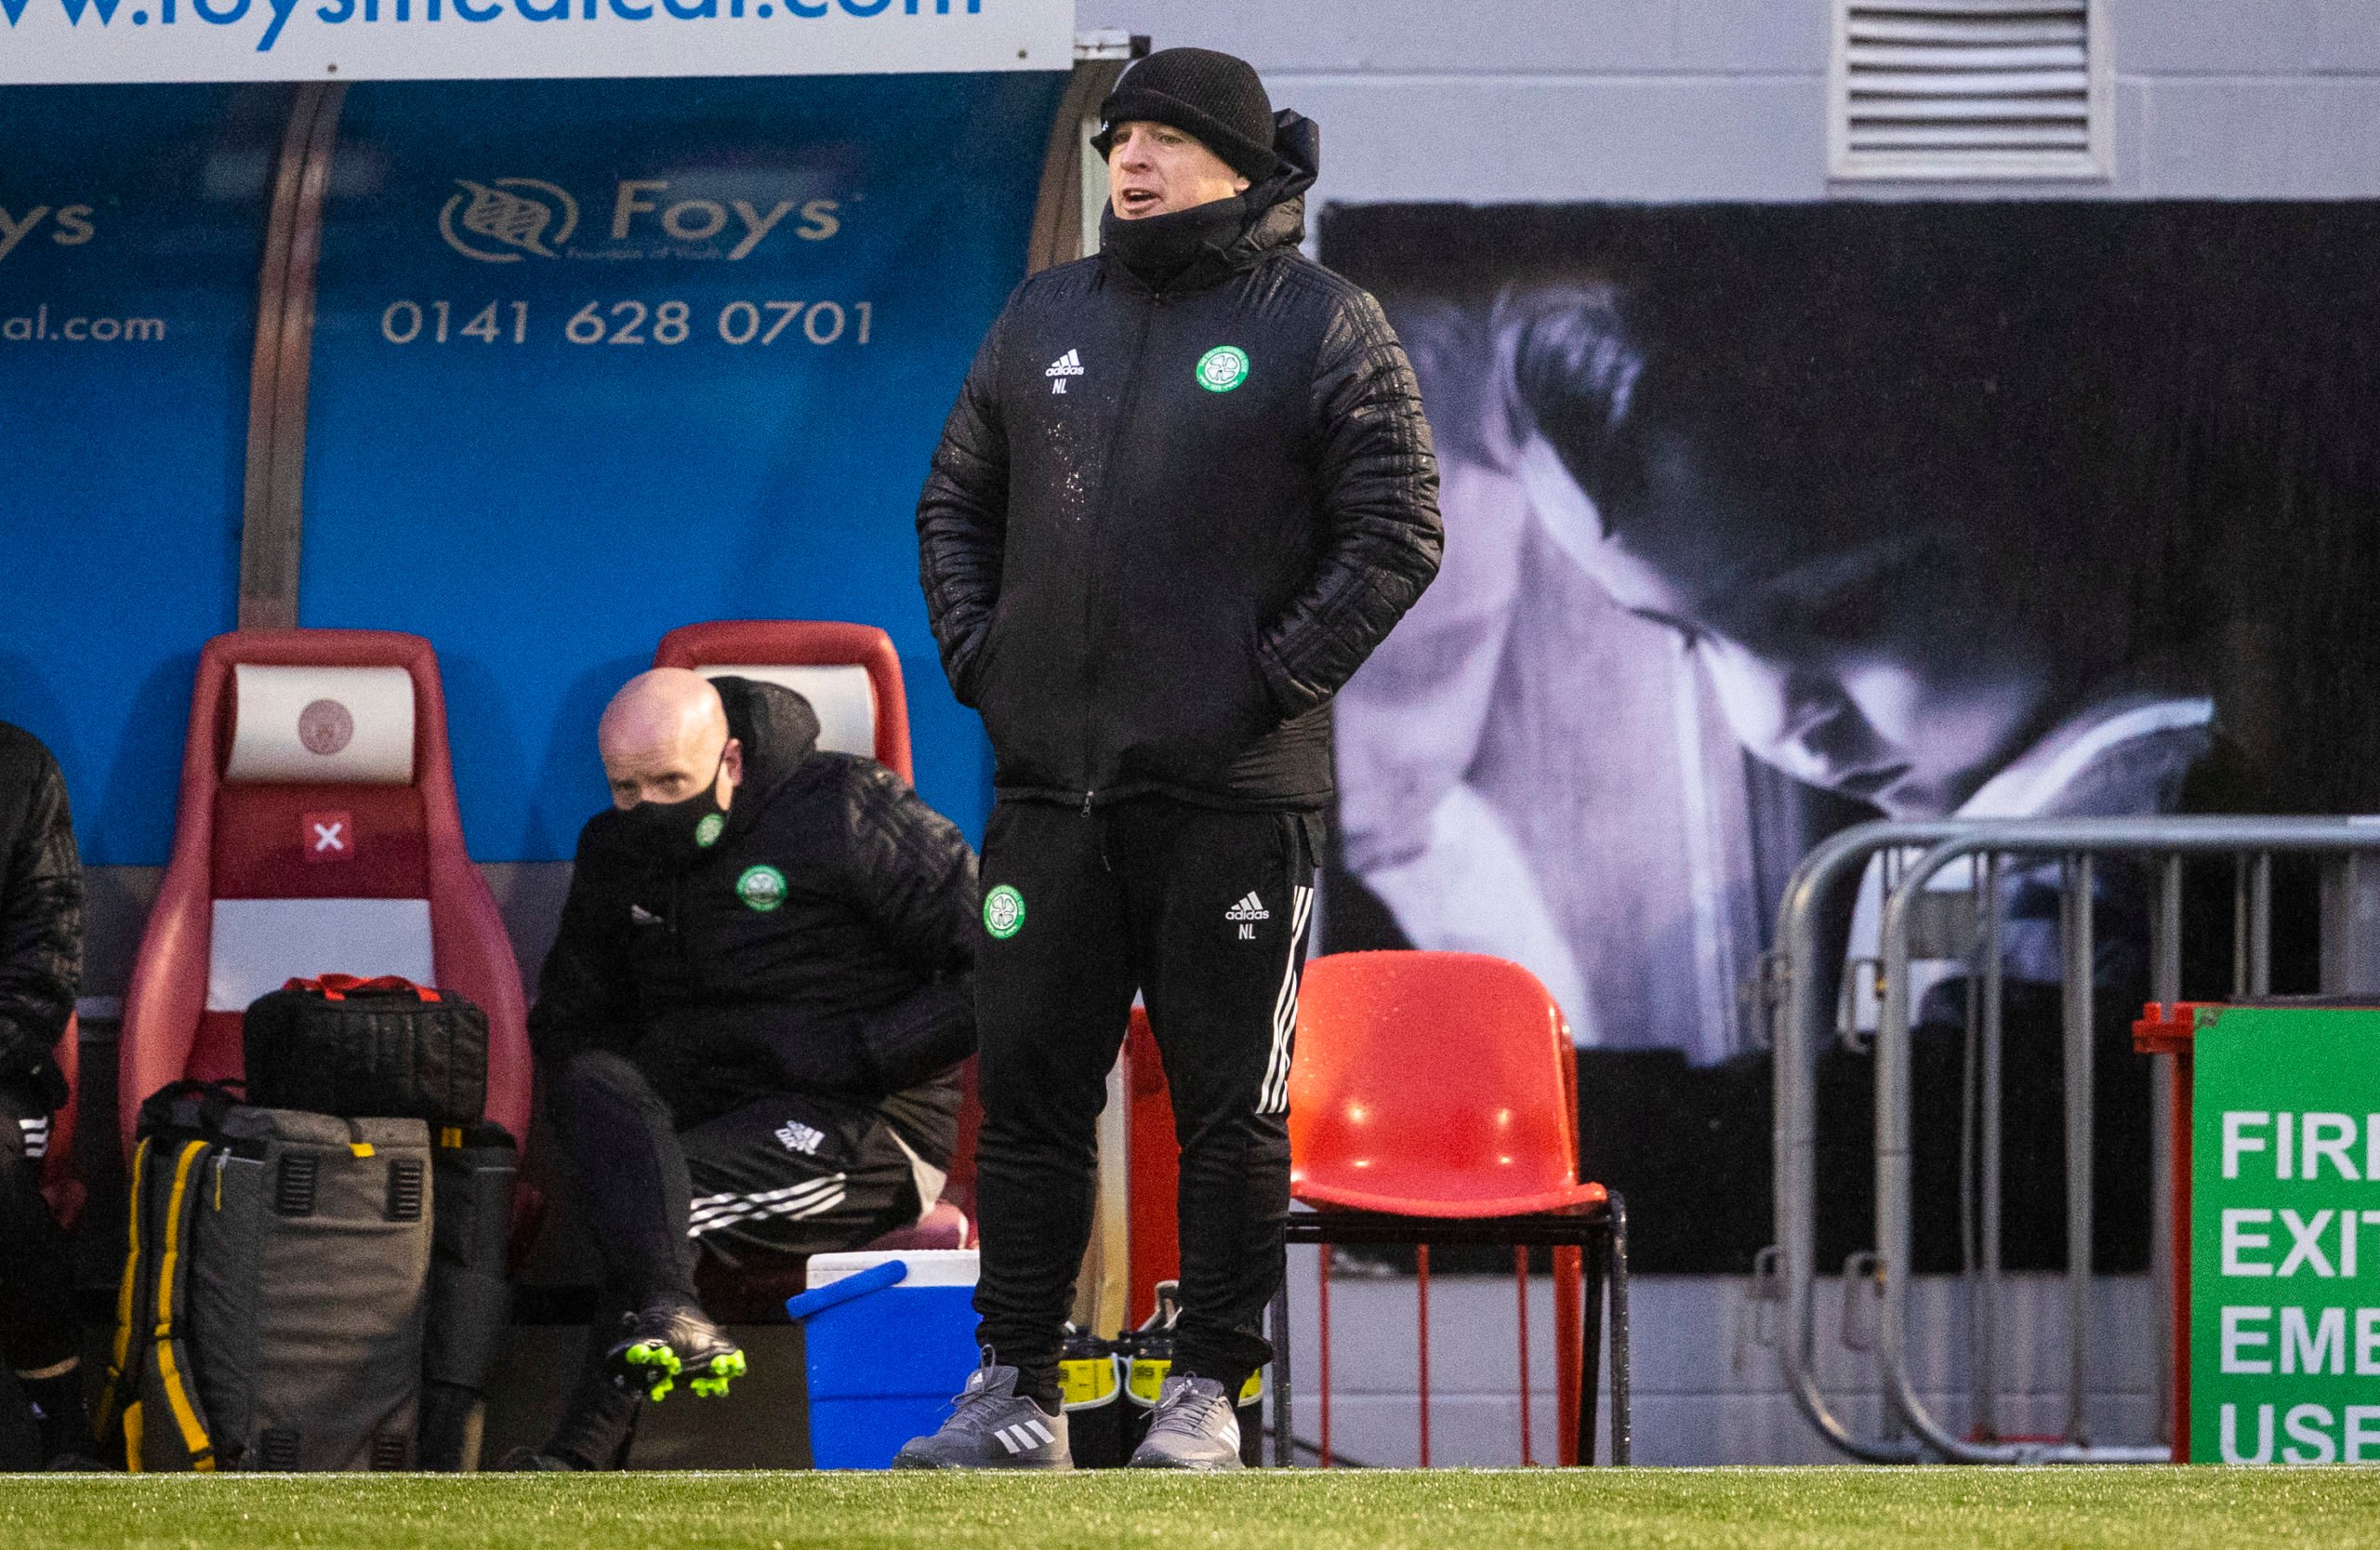 "Outstanding", "Brilliant"; Lenny applauds his Celtic team after 3-0 win